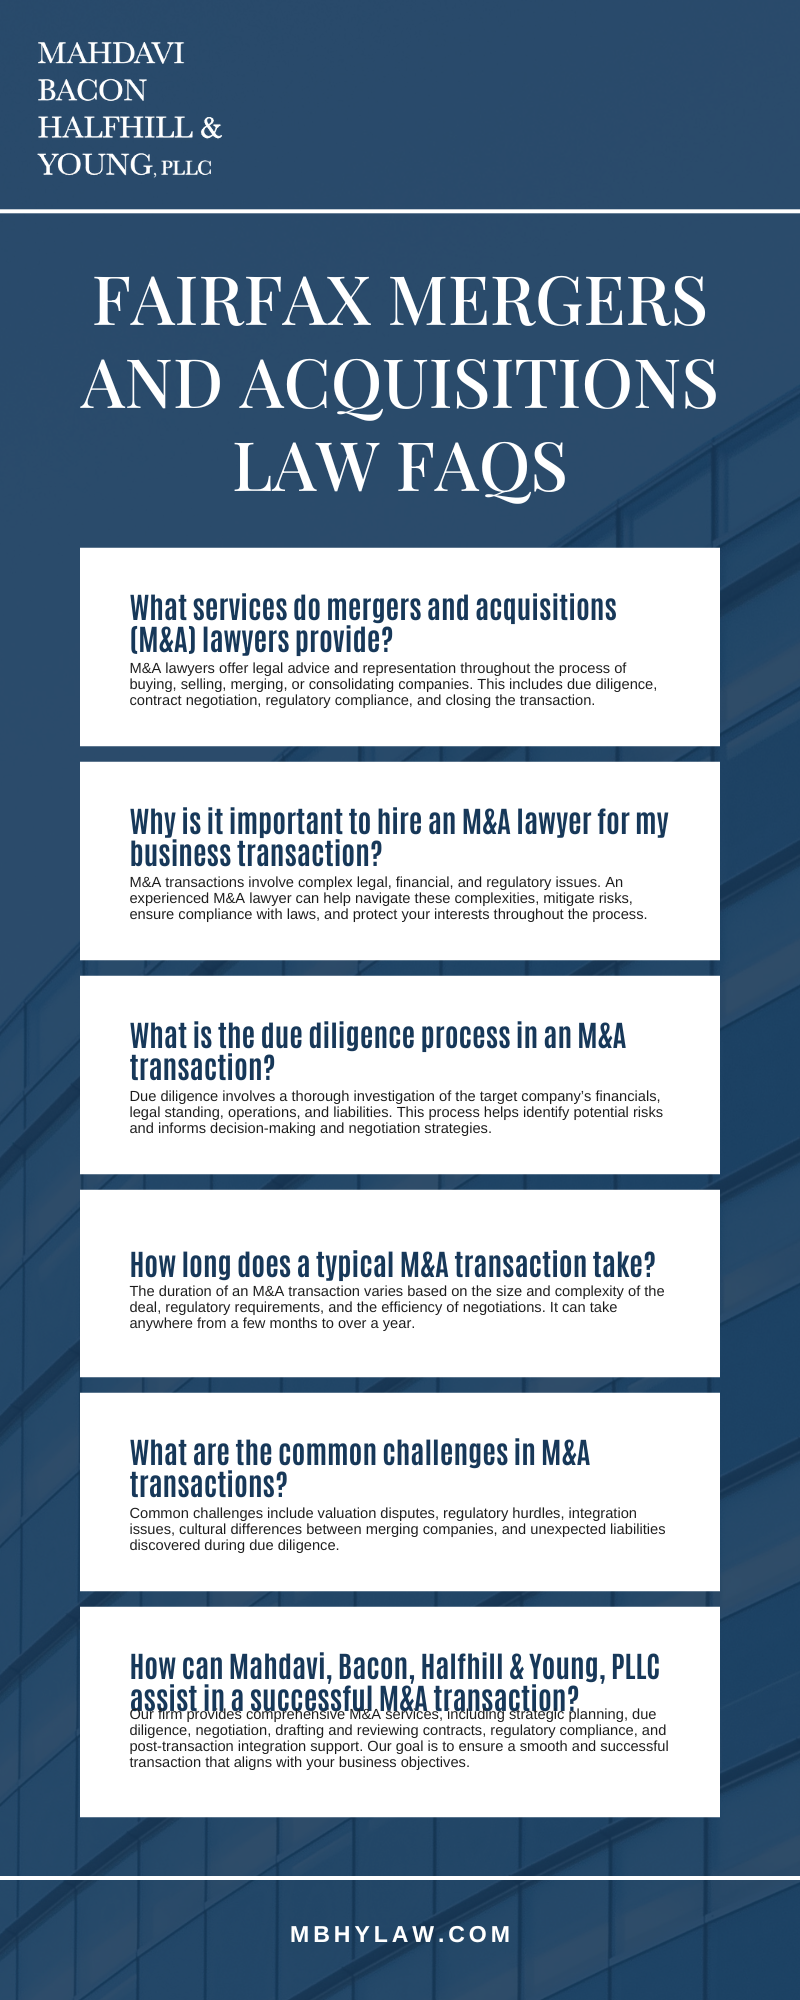 Fairfax Mergers And Acquisitions Law FAQs Infographic